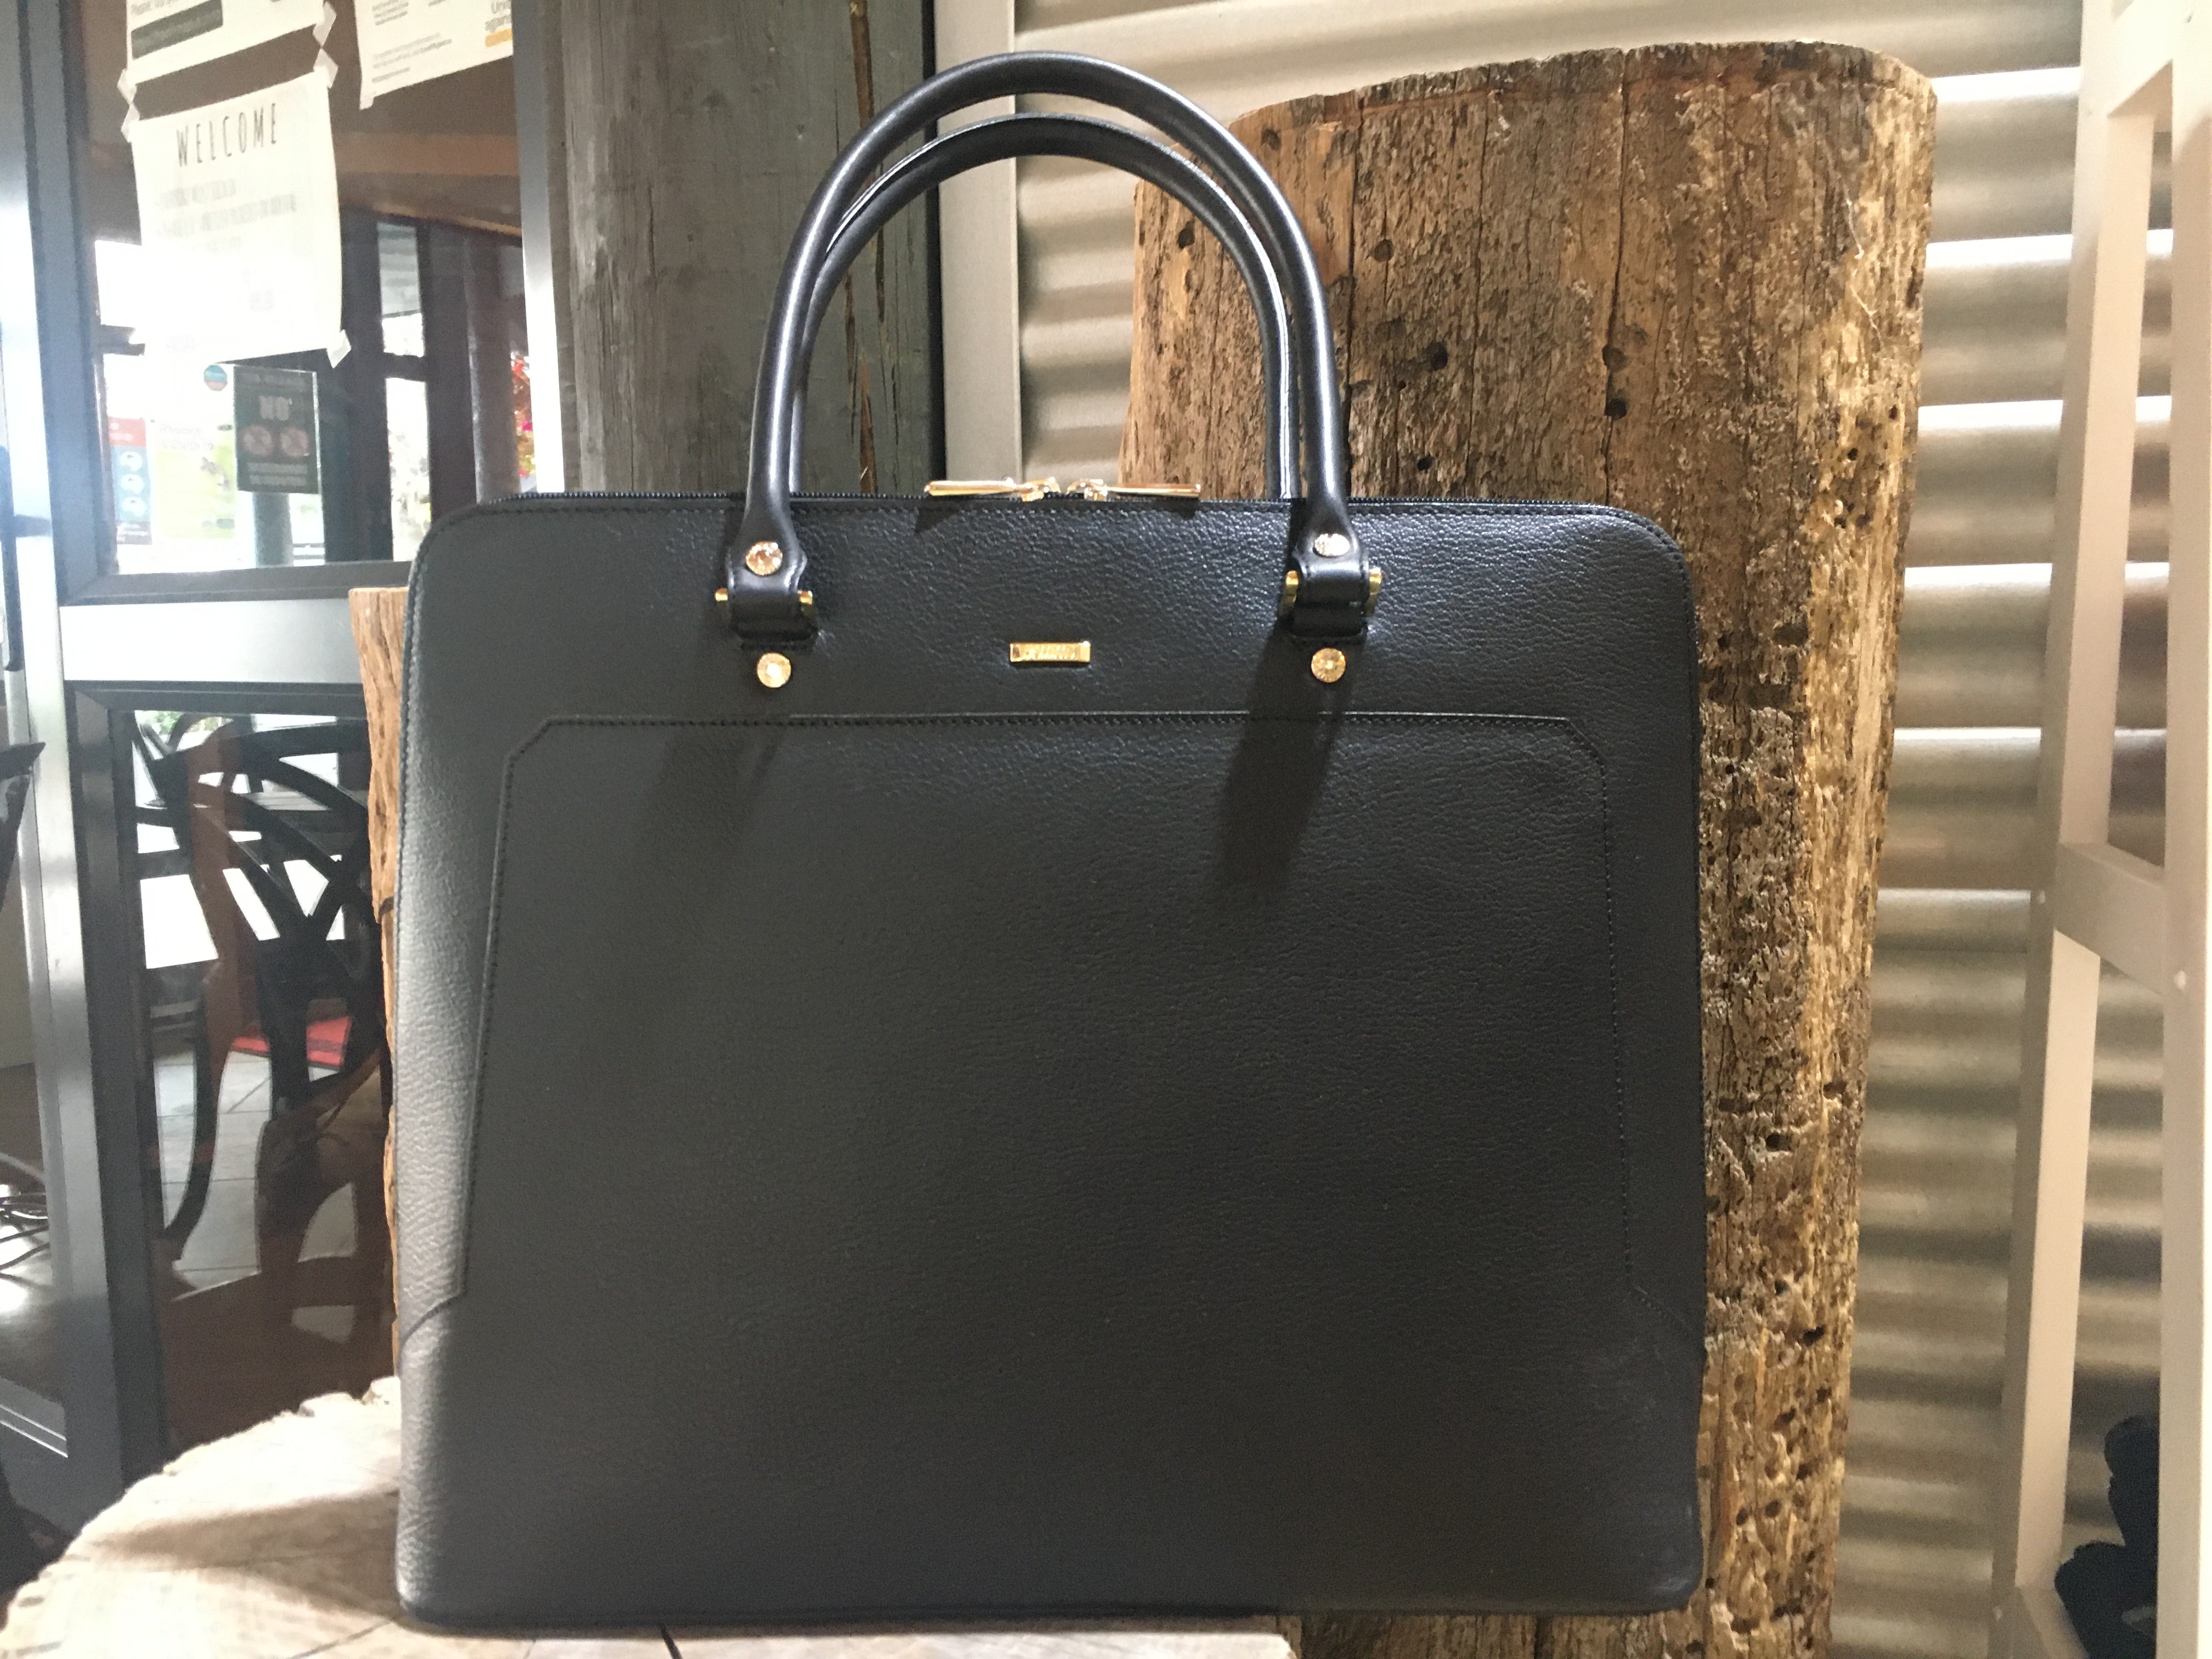 Laptop Leather Bag Black - Bags-Ladies : Tessa Maes - Gifts and Homewares Boutique